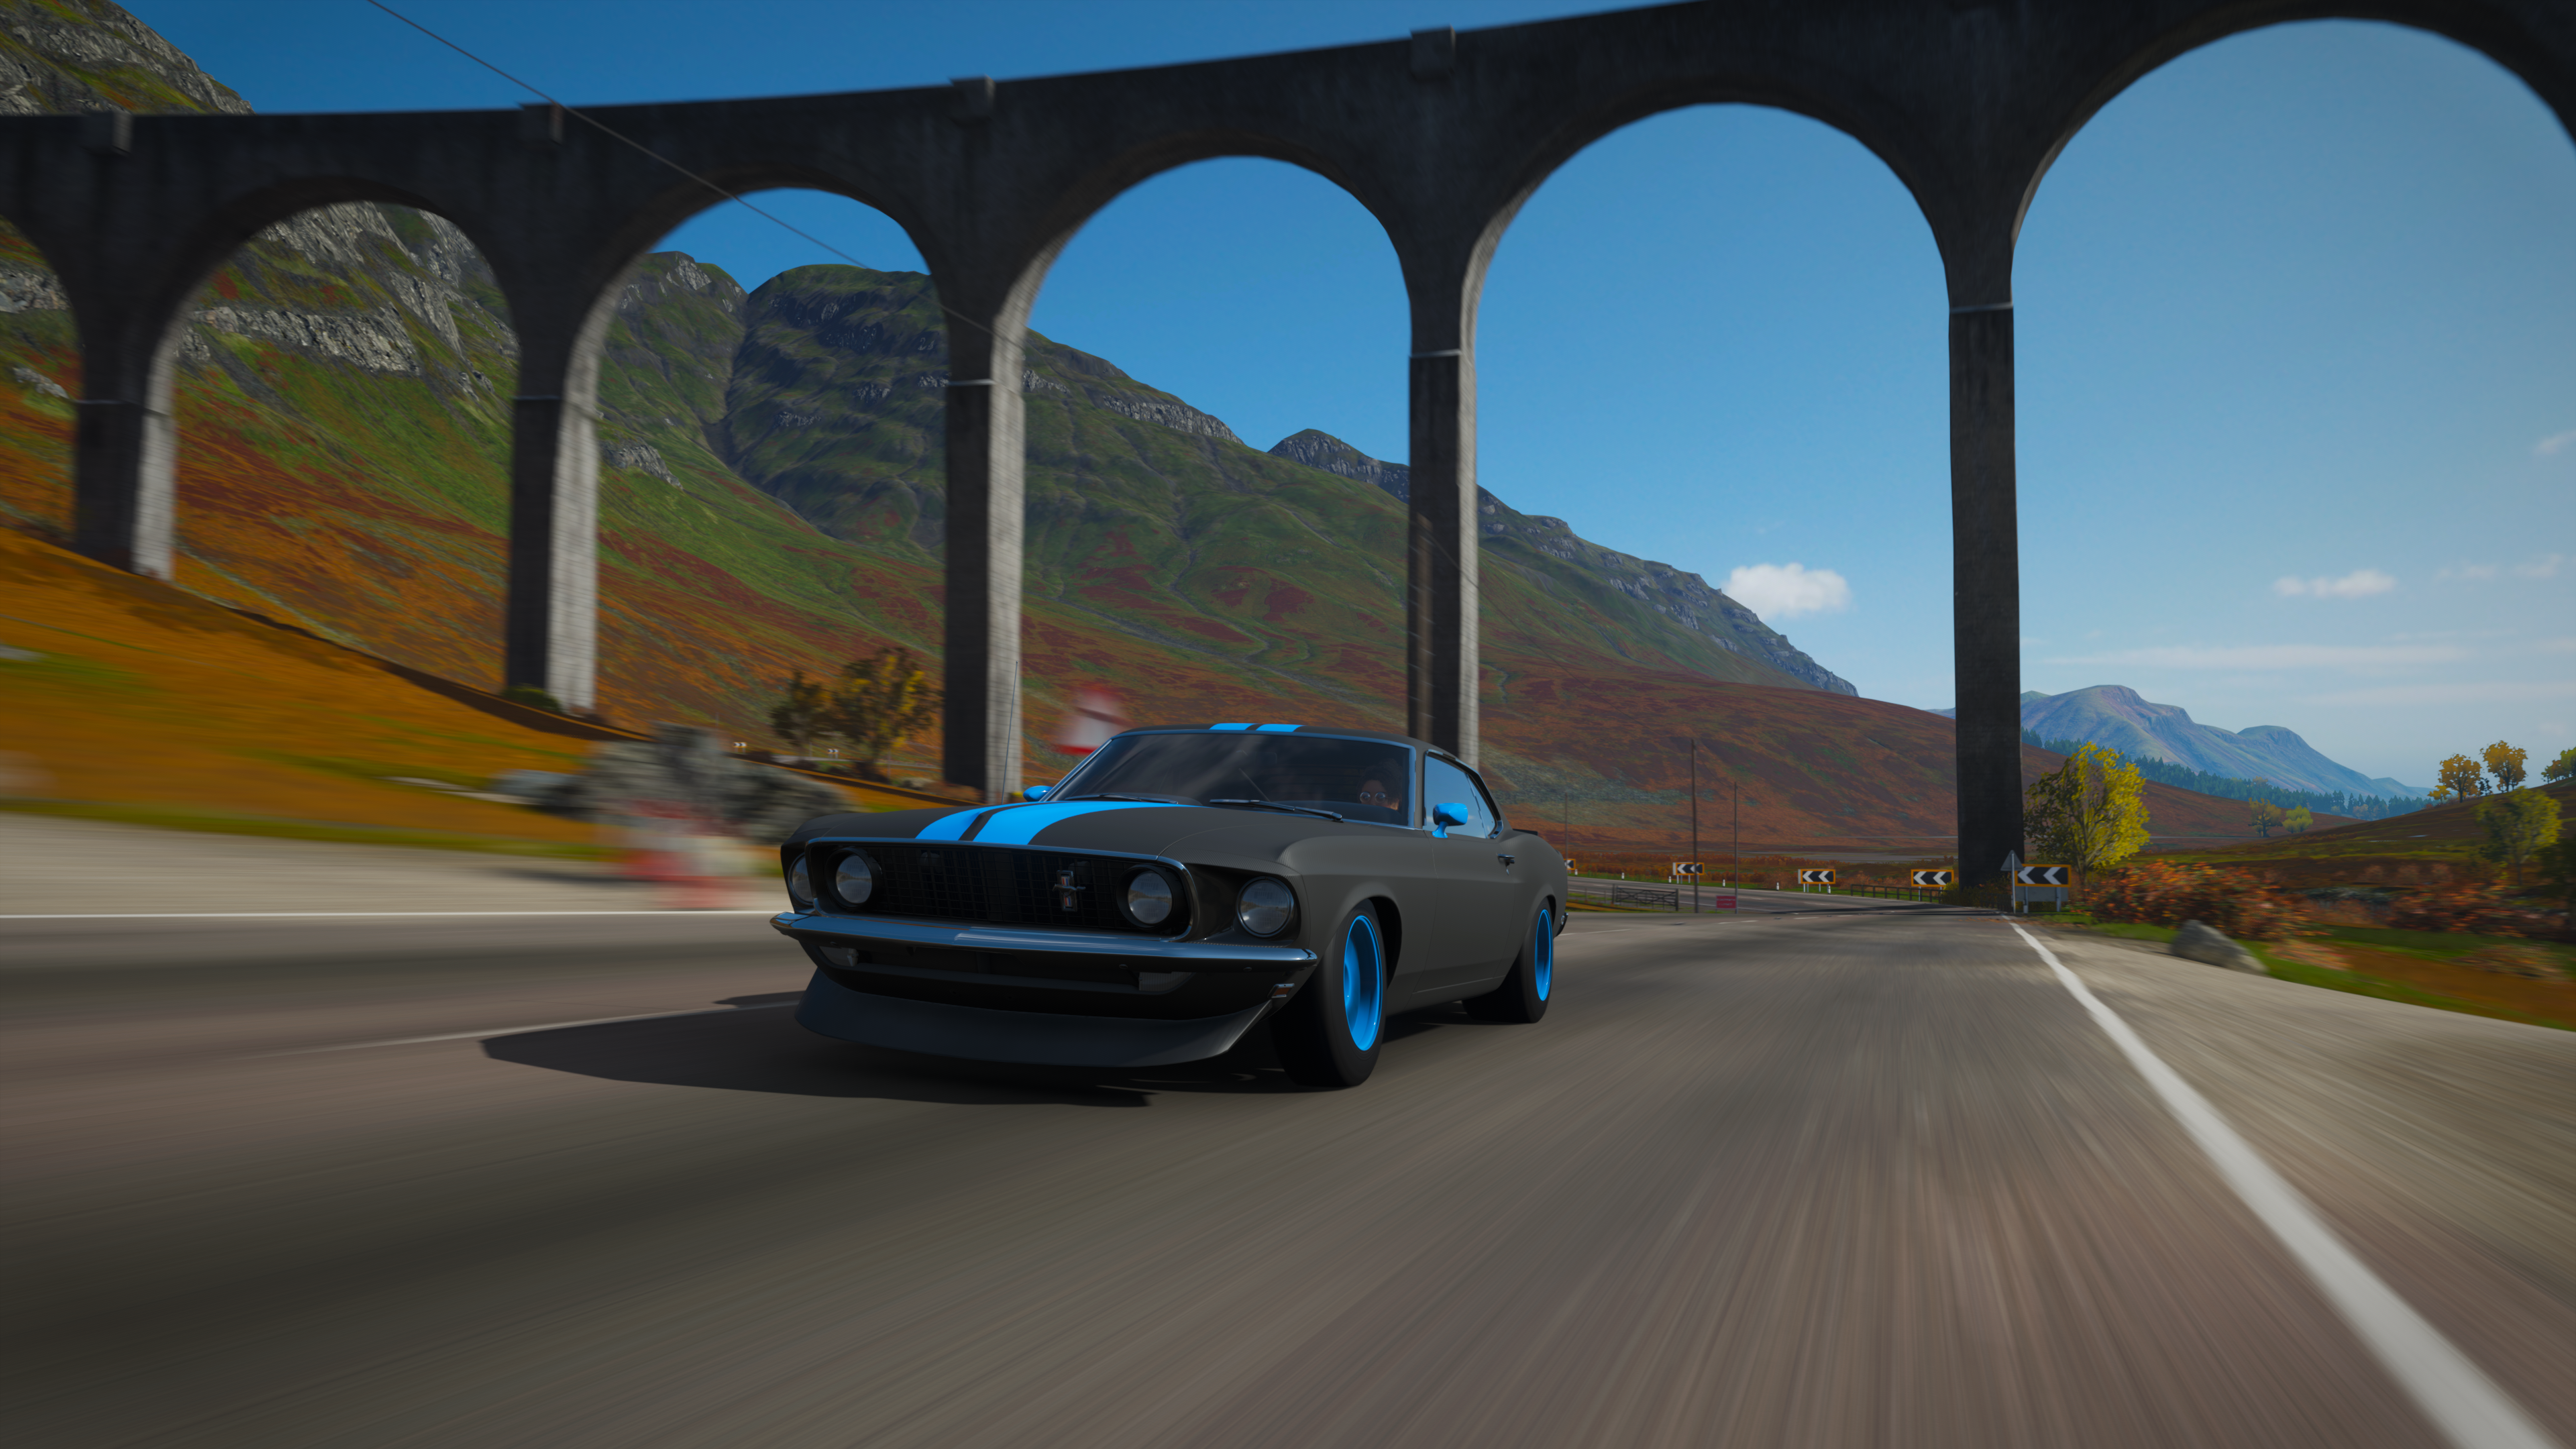 Forza Forza Horizon Forza Horizon 4 Ford Ford Mustang Viaduct Car Faster Video Games 3840x2160